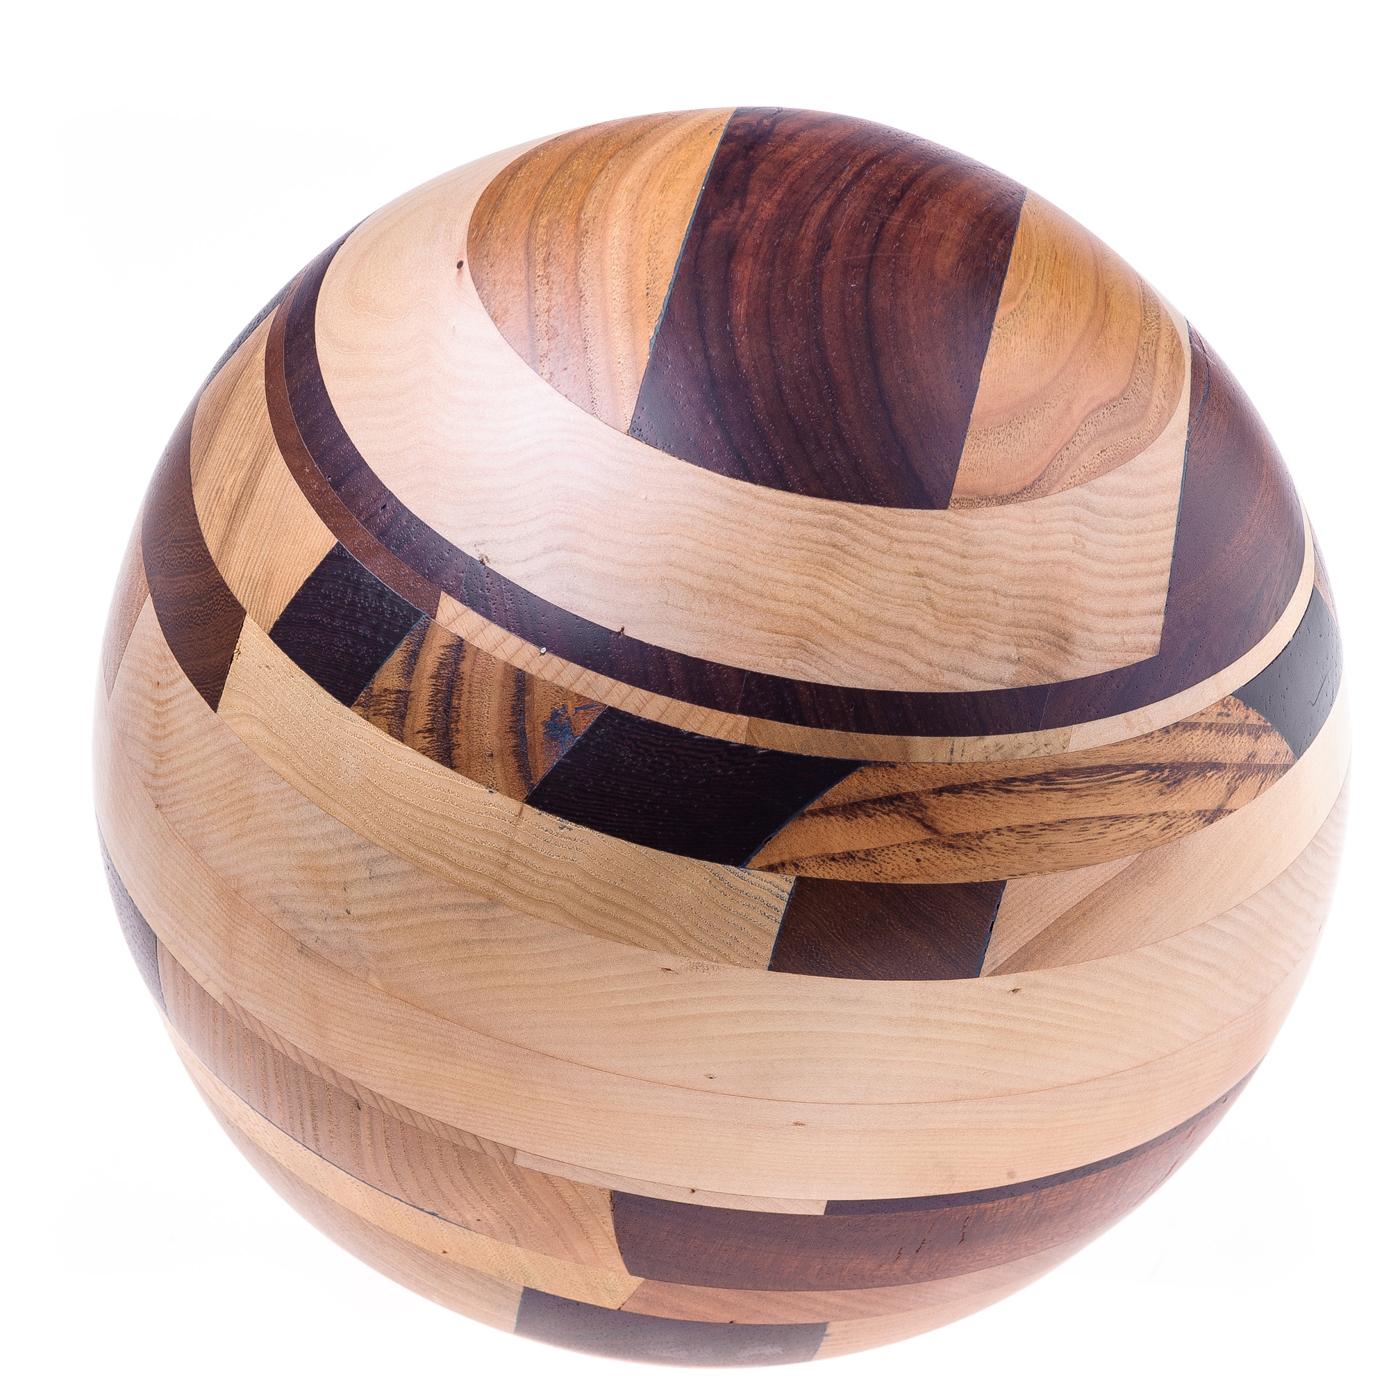 Timeless elegance and masterful attention to detail are the hallmarks of this sophisticated sculpture. The sphere is entirely handcrafted using wood from four continents: paduka with its subtle red hues, wenge with its dark tone, walnut, chestnut,